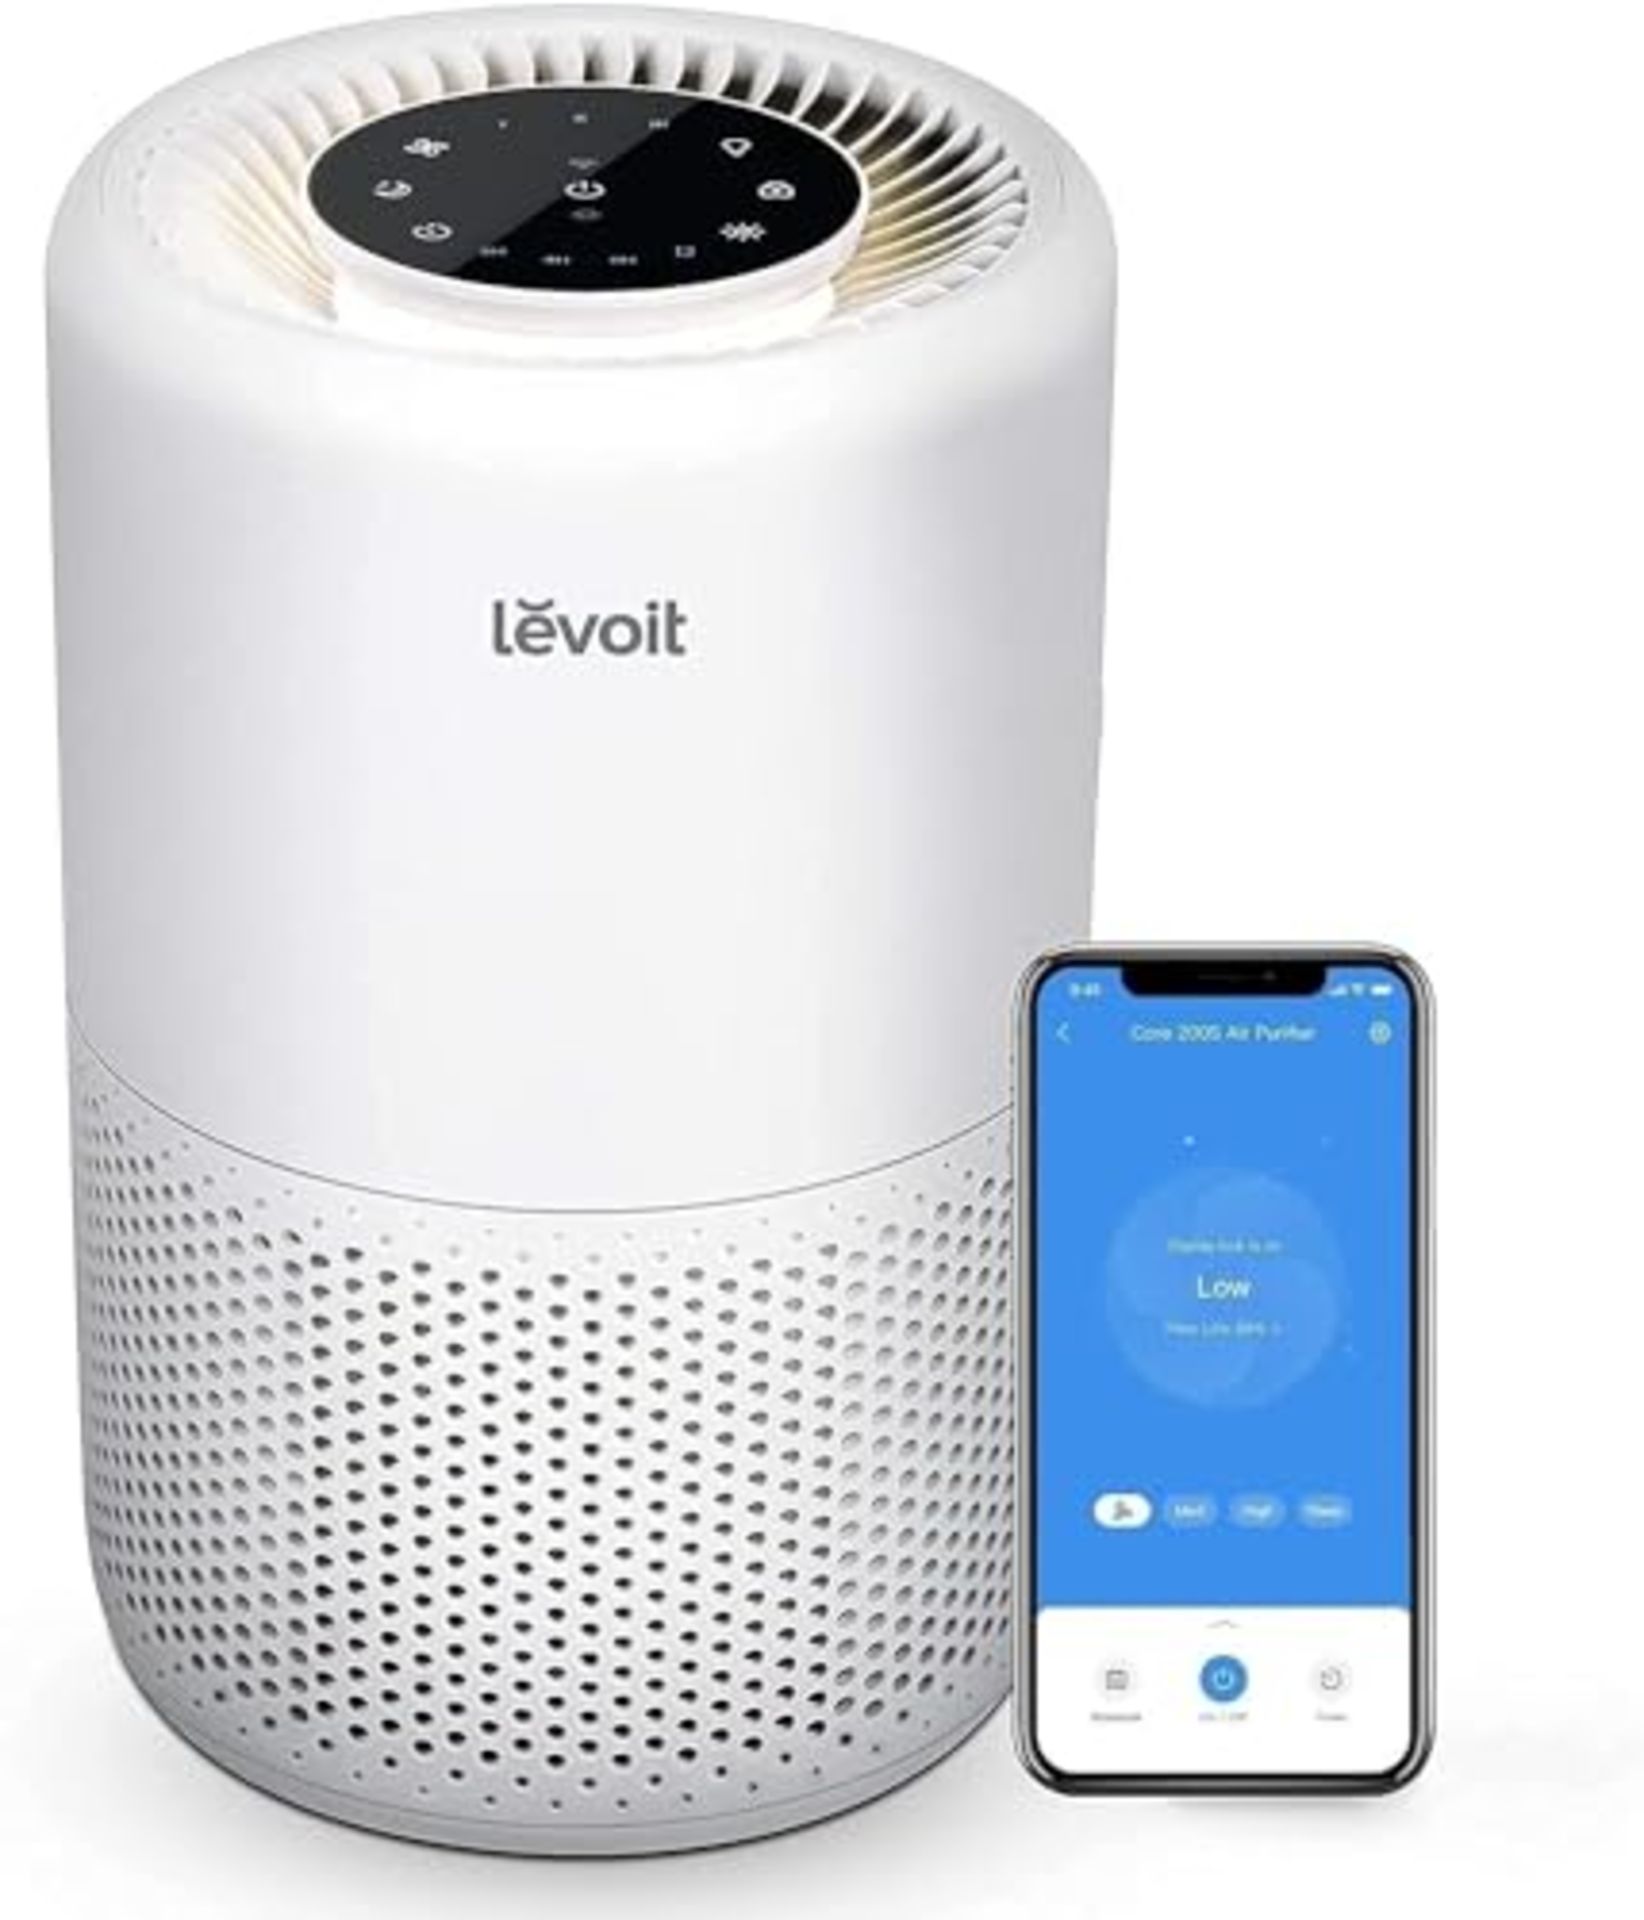 RRP £89.00 LEVOIT Air Purifier HEPA Filter for Allergies, Air Filter against Mold Dust Pollen Odo